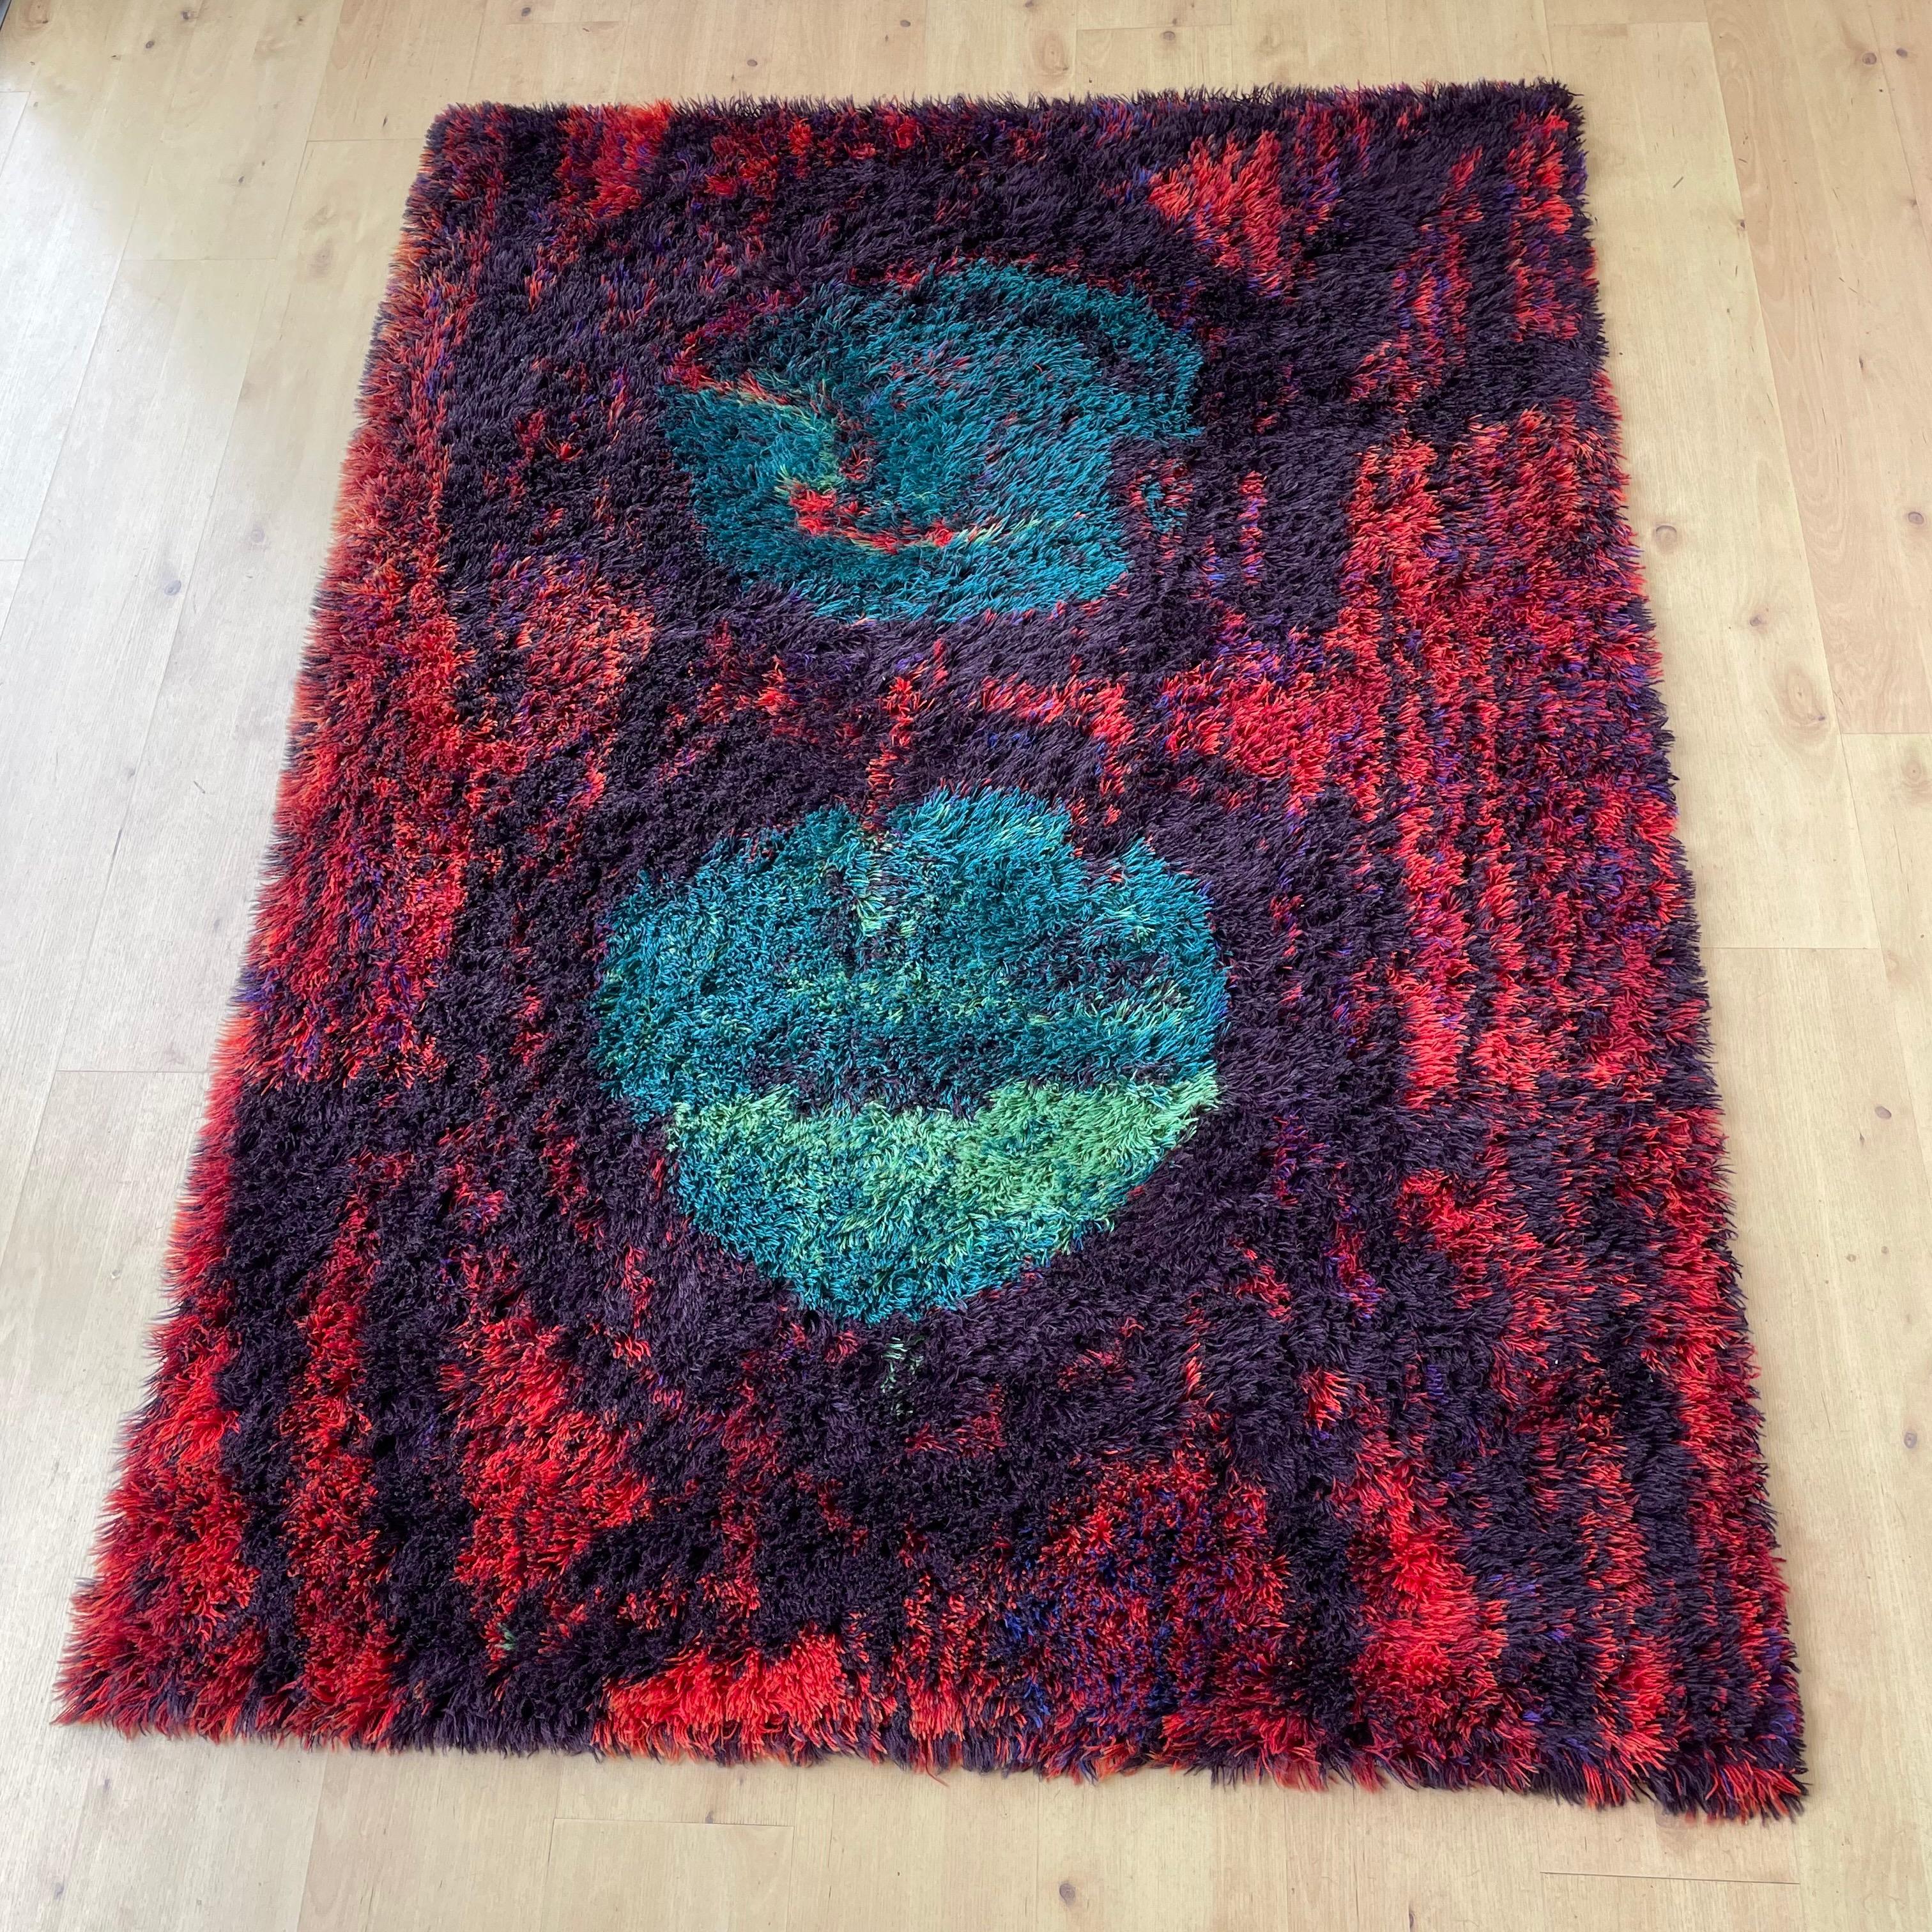 

no. 2 two identical rugs are available......

Article:

Original huge 1960s high pile rya rug

Origin:
Denmark

Producer:
Hojer Eksport Wilton, Denmark

Description:
this rug is a great example of 60s pop art interior. made in high quality danish